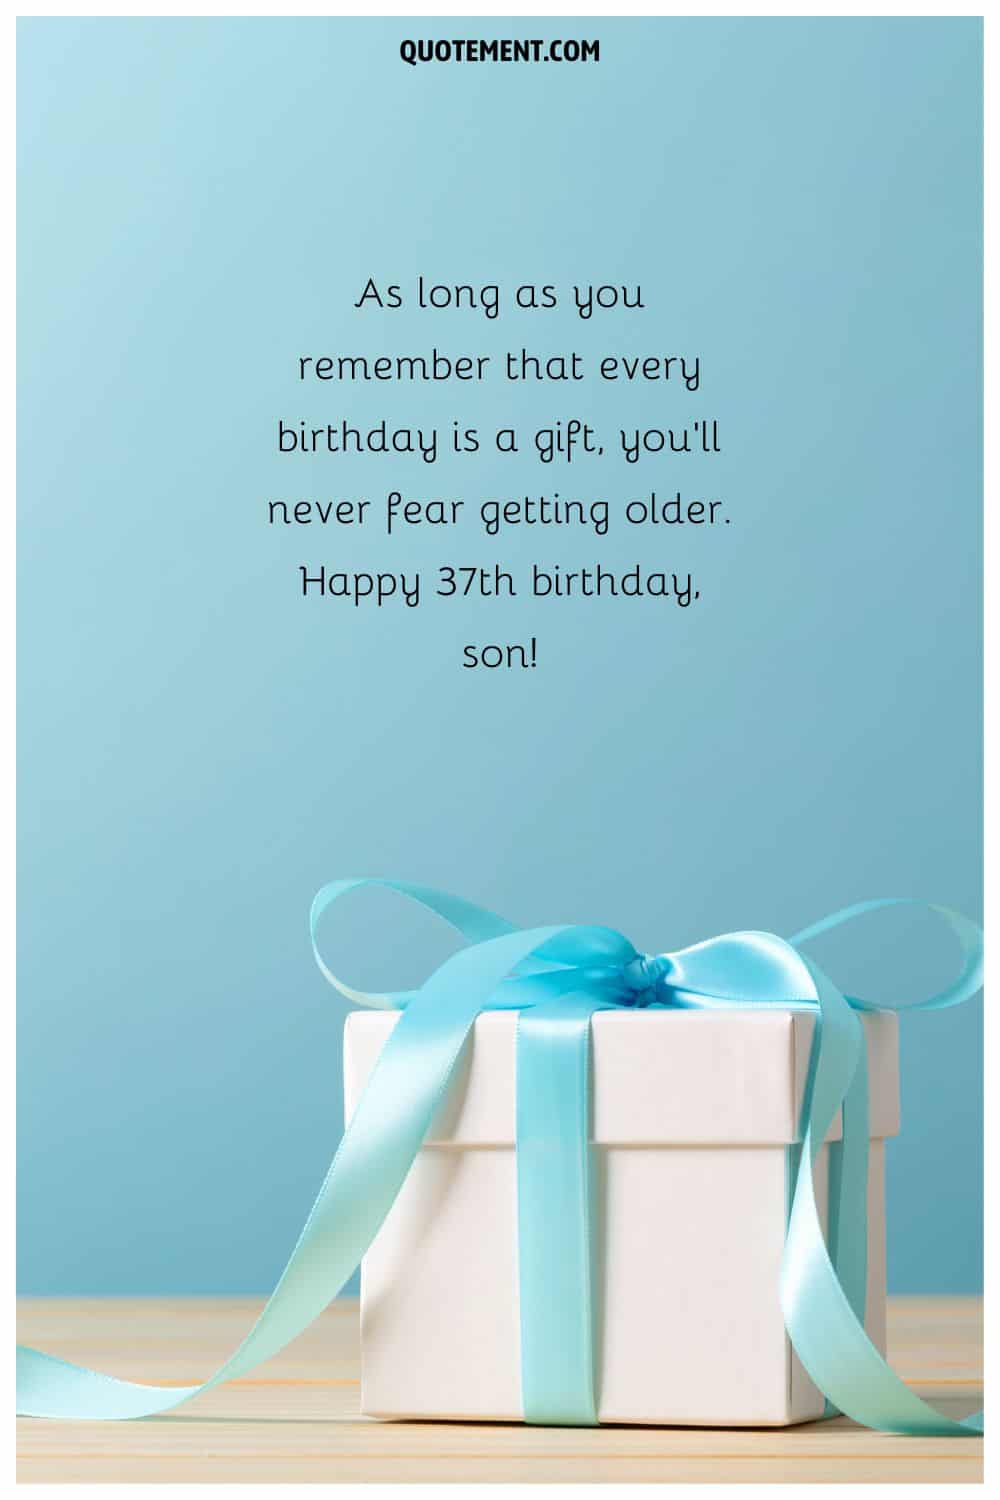 Birthday message for son's 37th birthday and a gift.